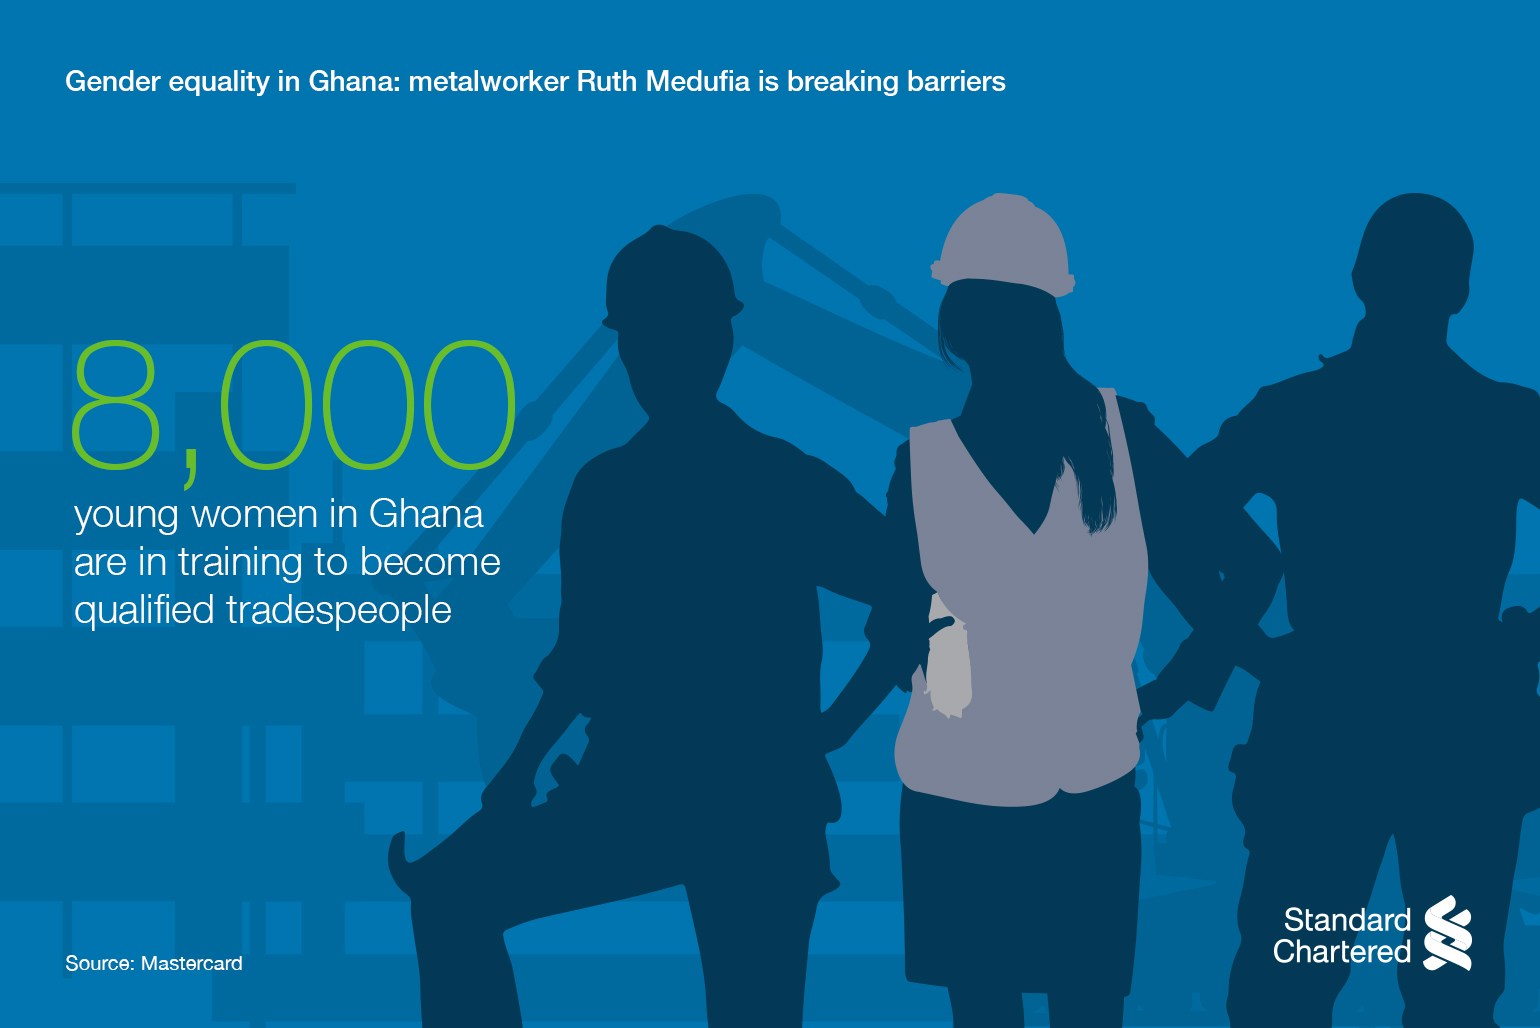 8,000 young women in Ghana are in training to become qualified tradespeople